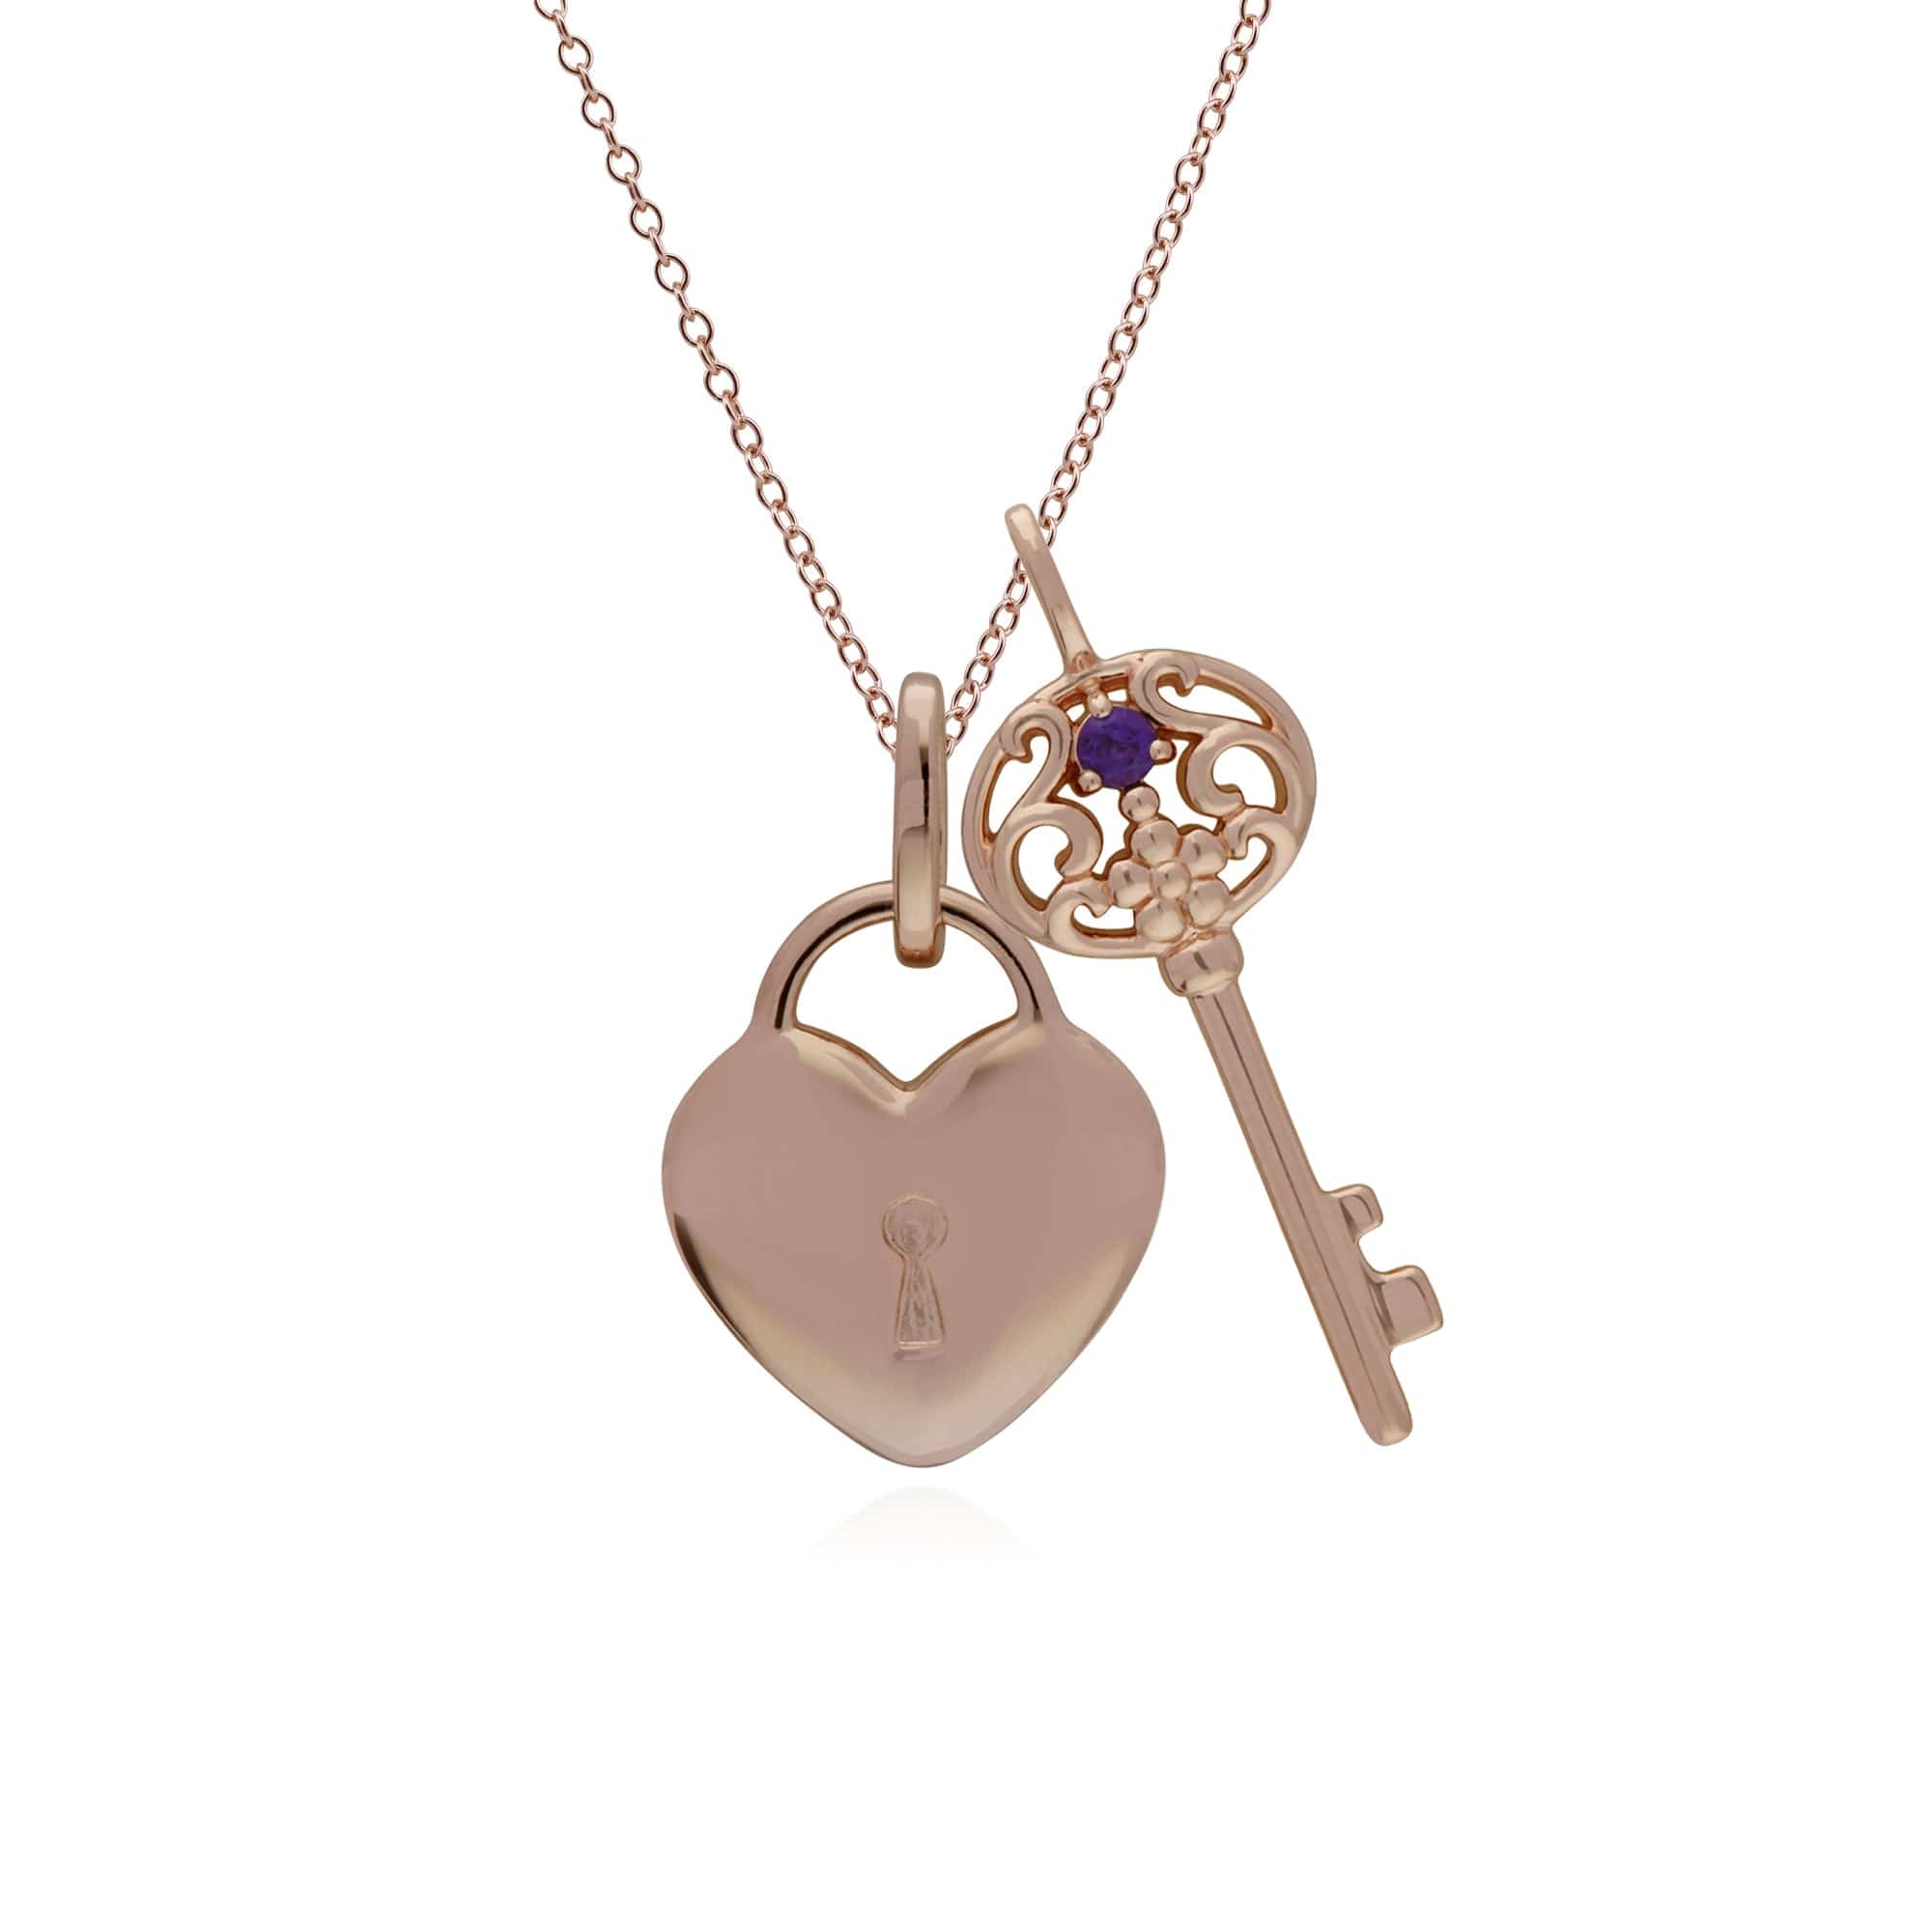 270P026705925-270P026901925 Classic Heart Lock Pendant & Amethyst Big Key Charm in Rose Gold Plated 925 Sterling Silver 1